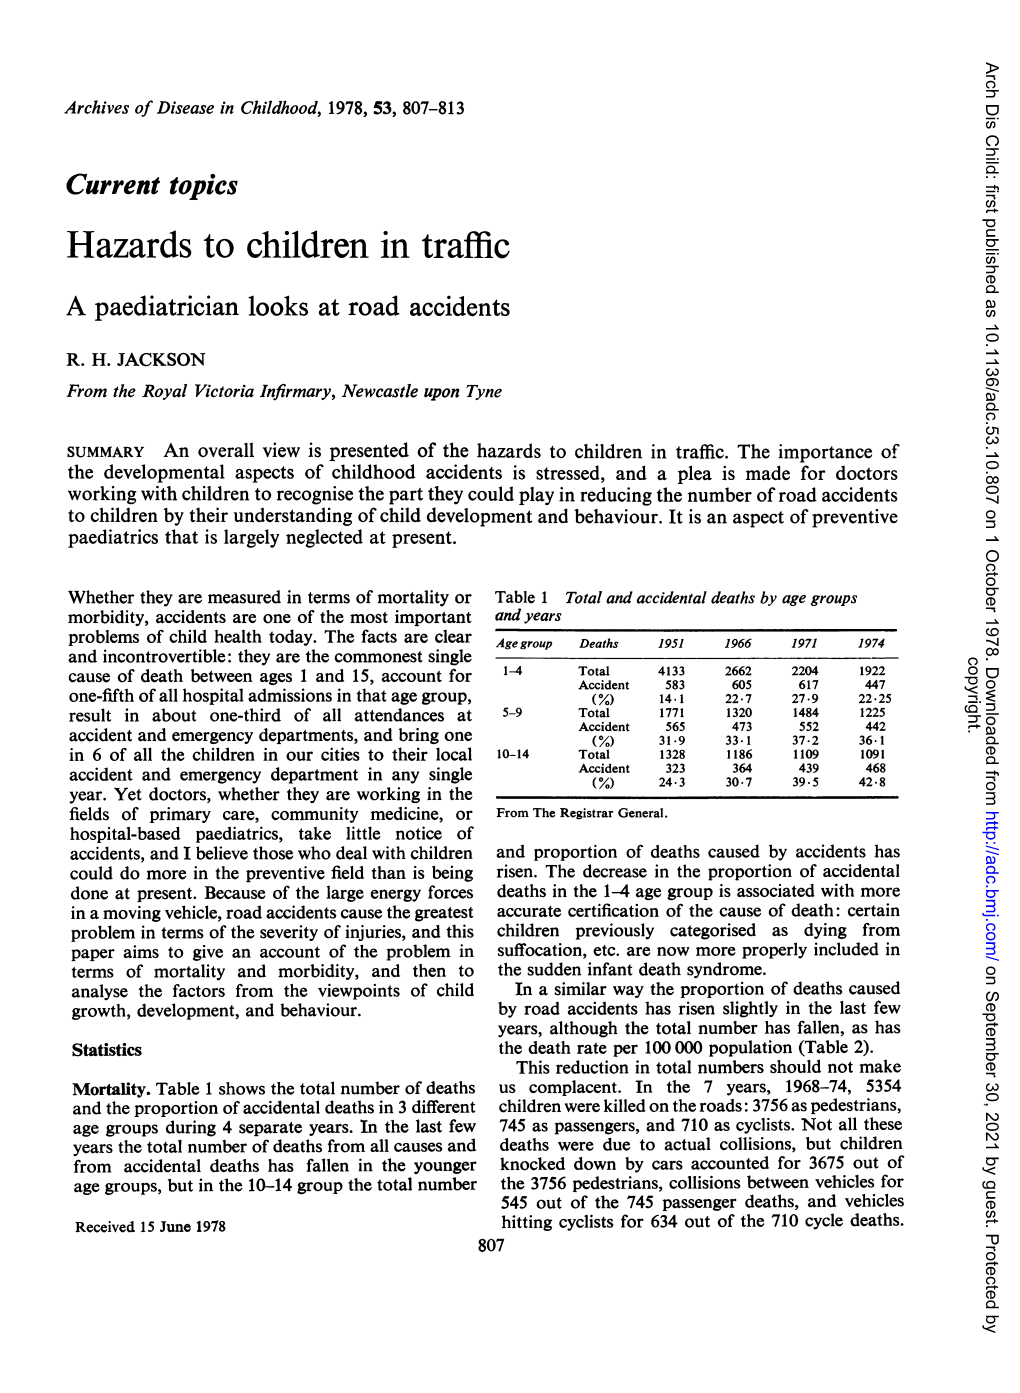 Hazards to Children in Traffic a Paediatrician Looks at Road Accidents